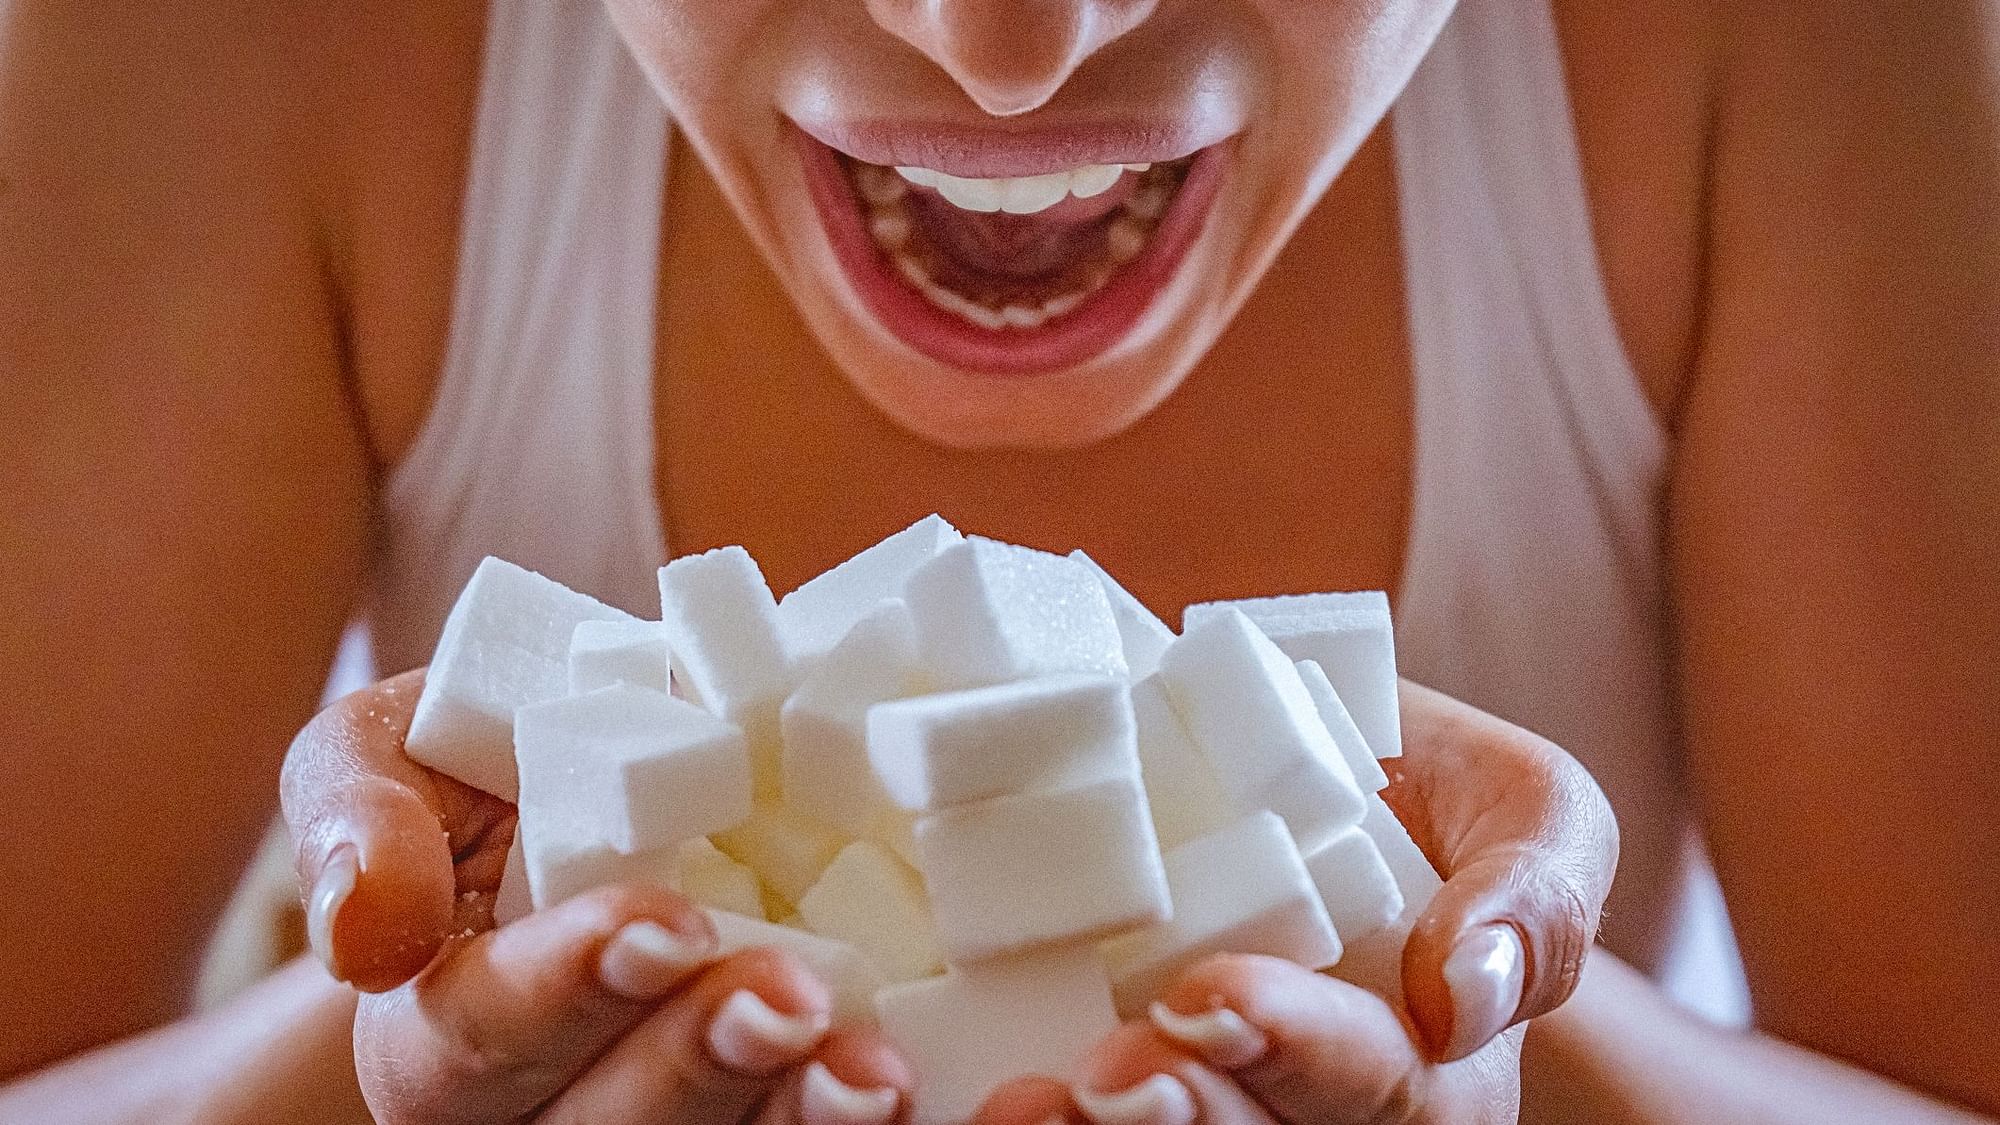 The average intake of added sugar is more among women than in men said a survey.